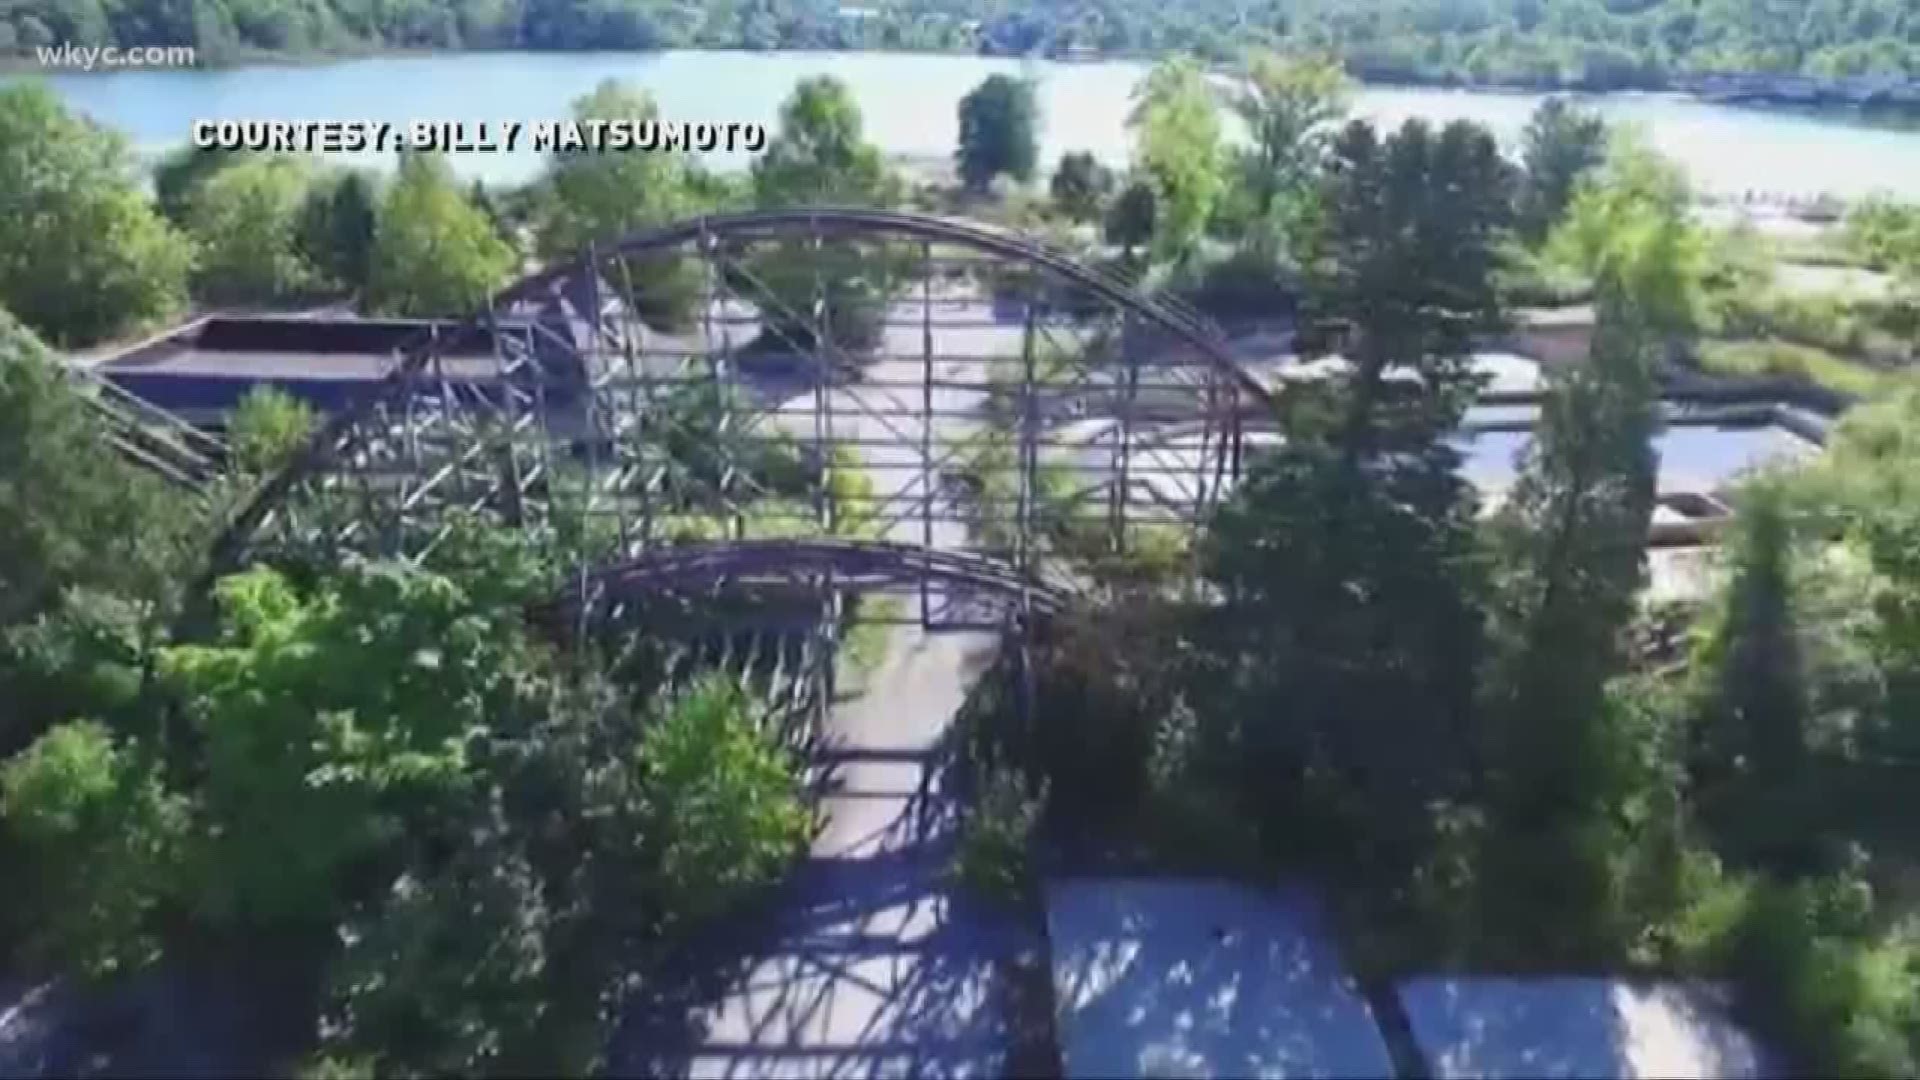 The former home of Geauga lake could get new life